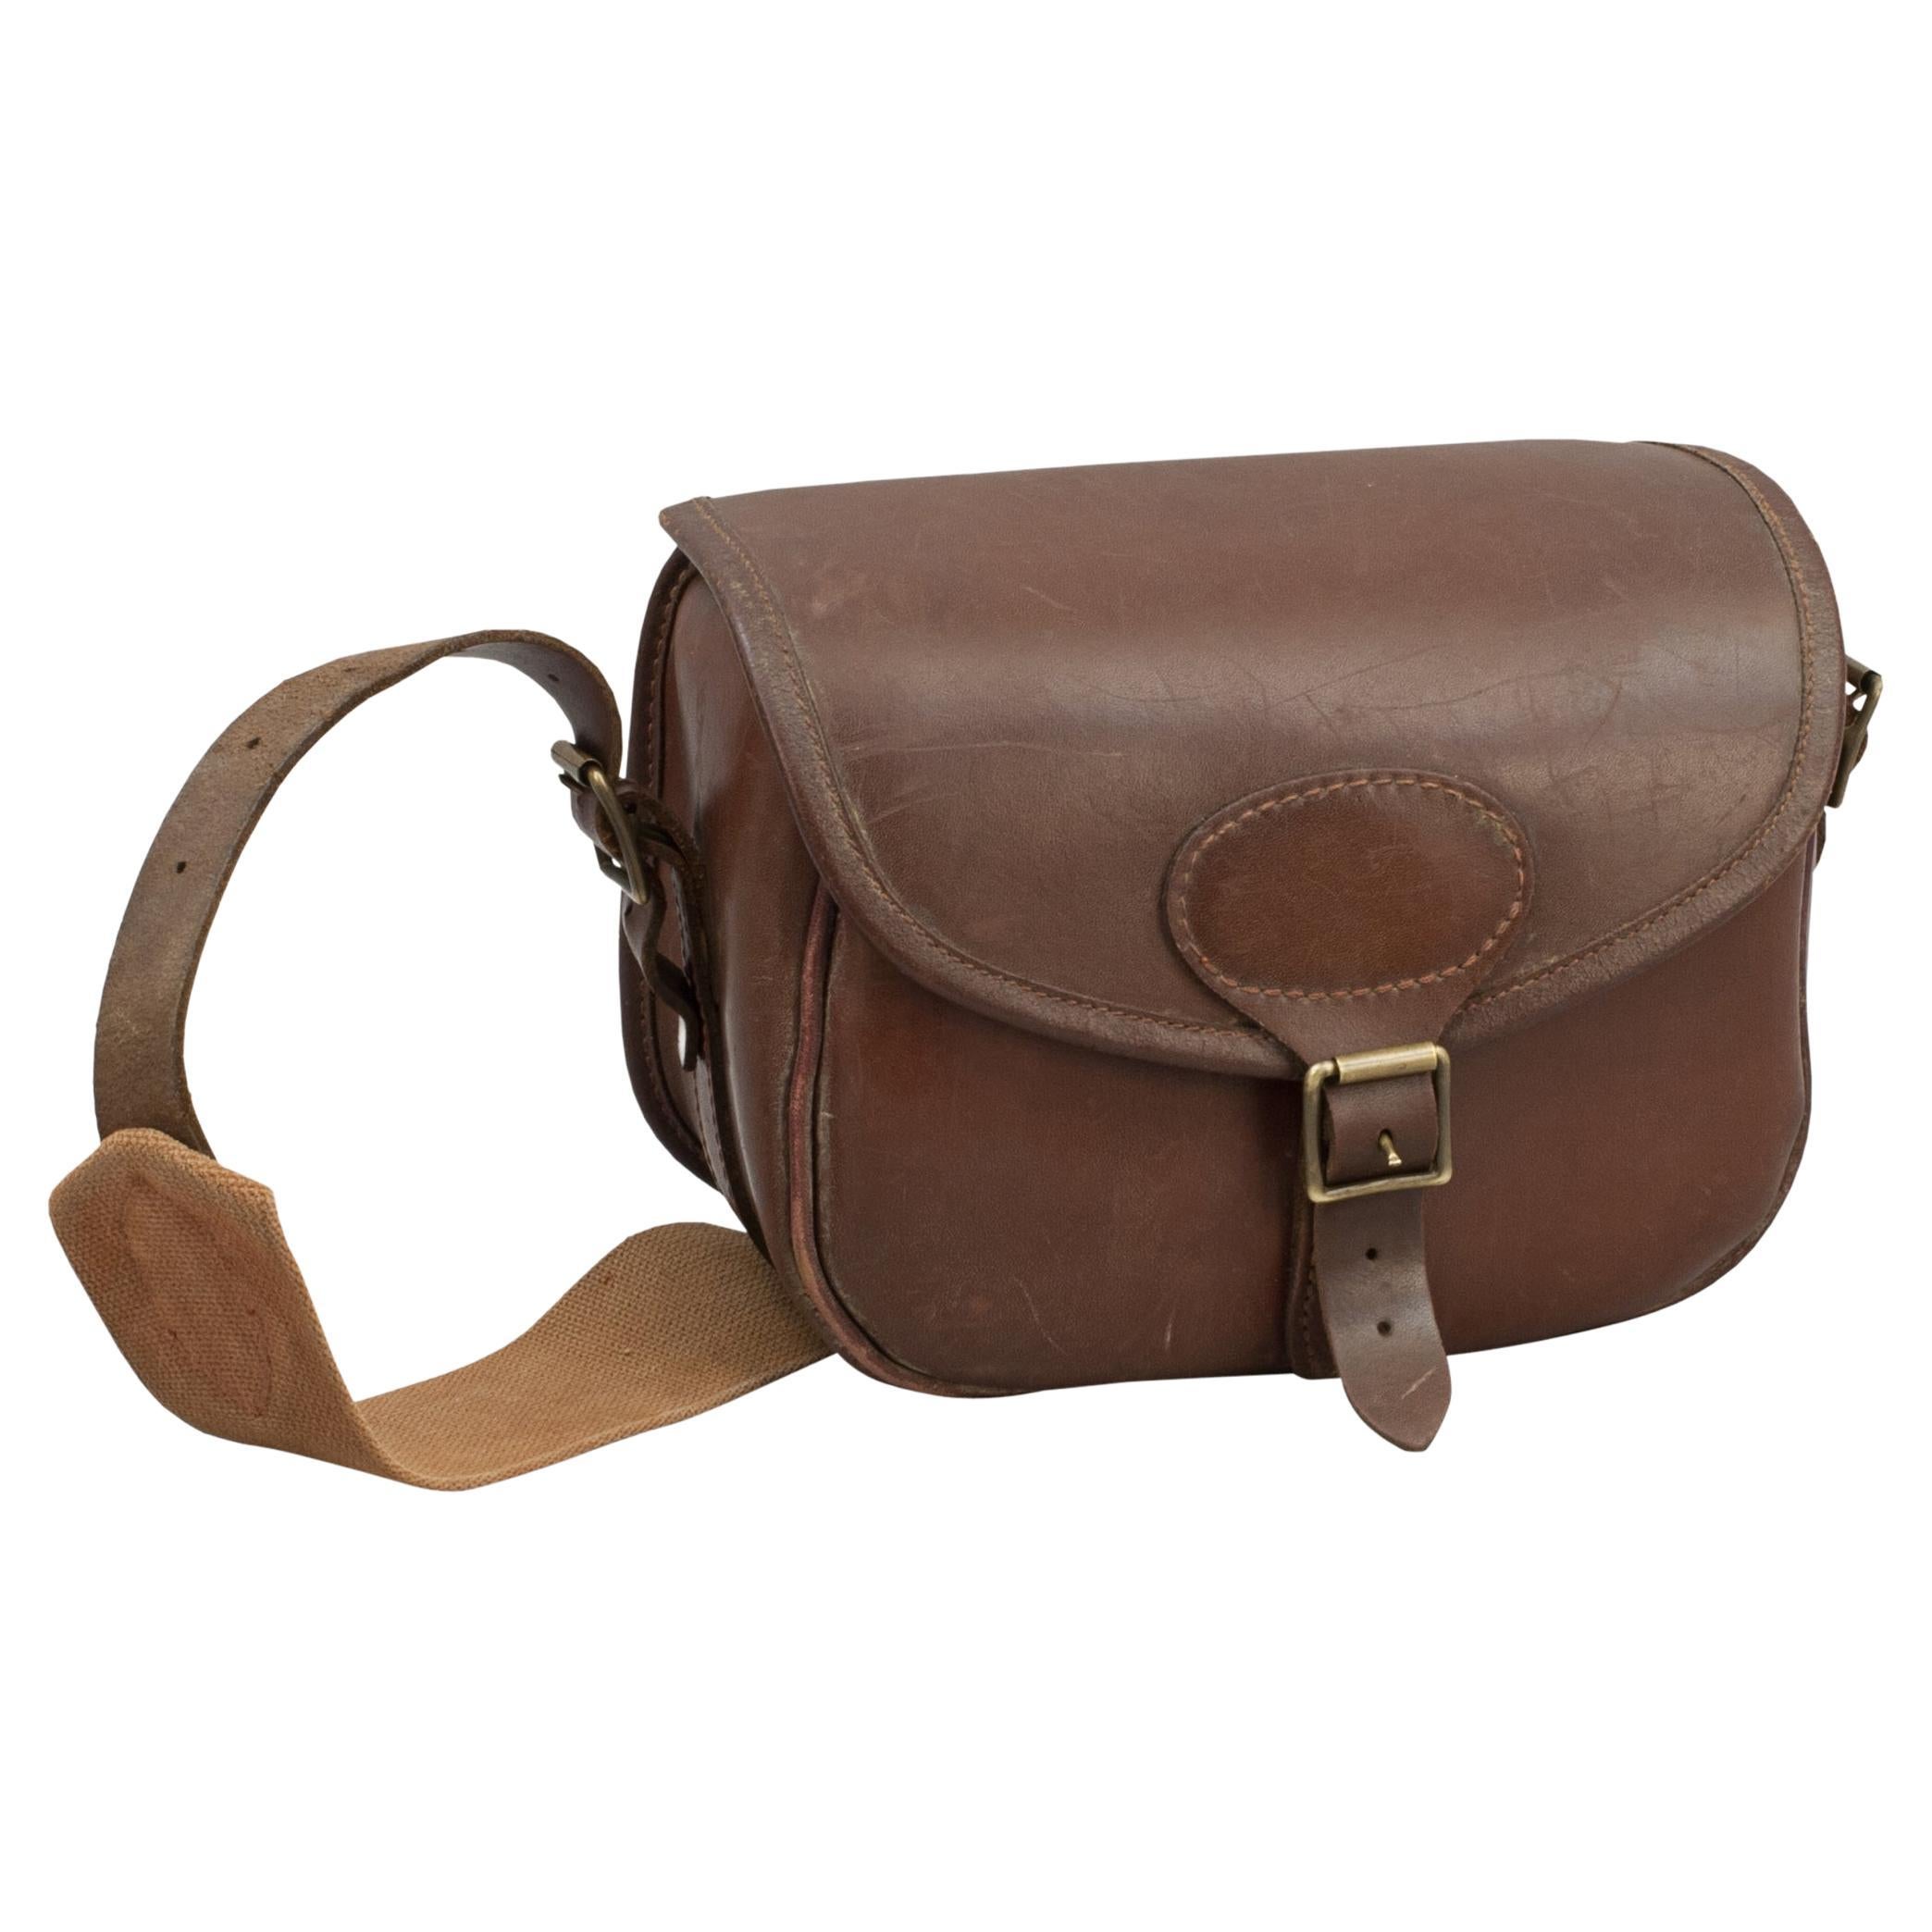 Leather Cartridge Bag For Sale